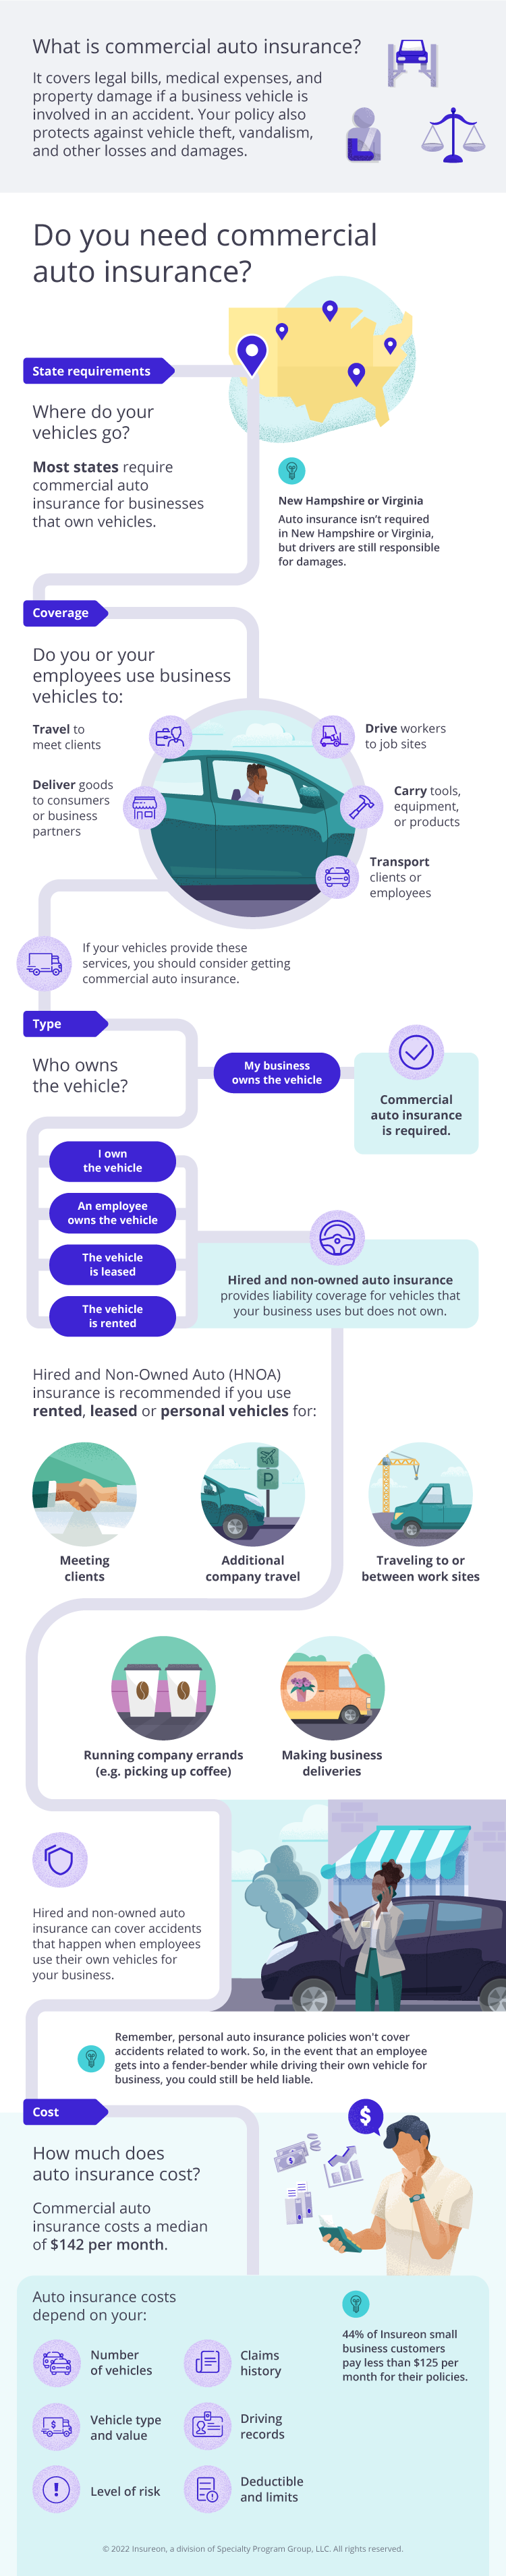 Learn more about getting commercial auto insurance quotes with Insureon.